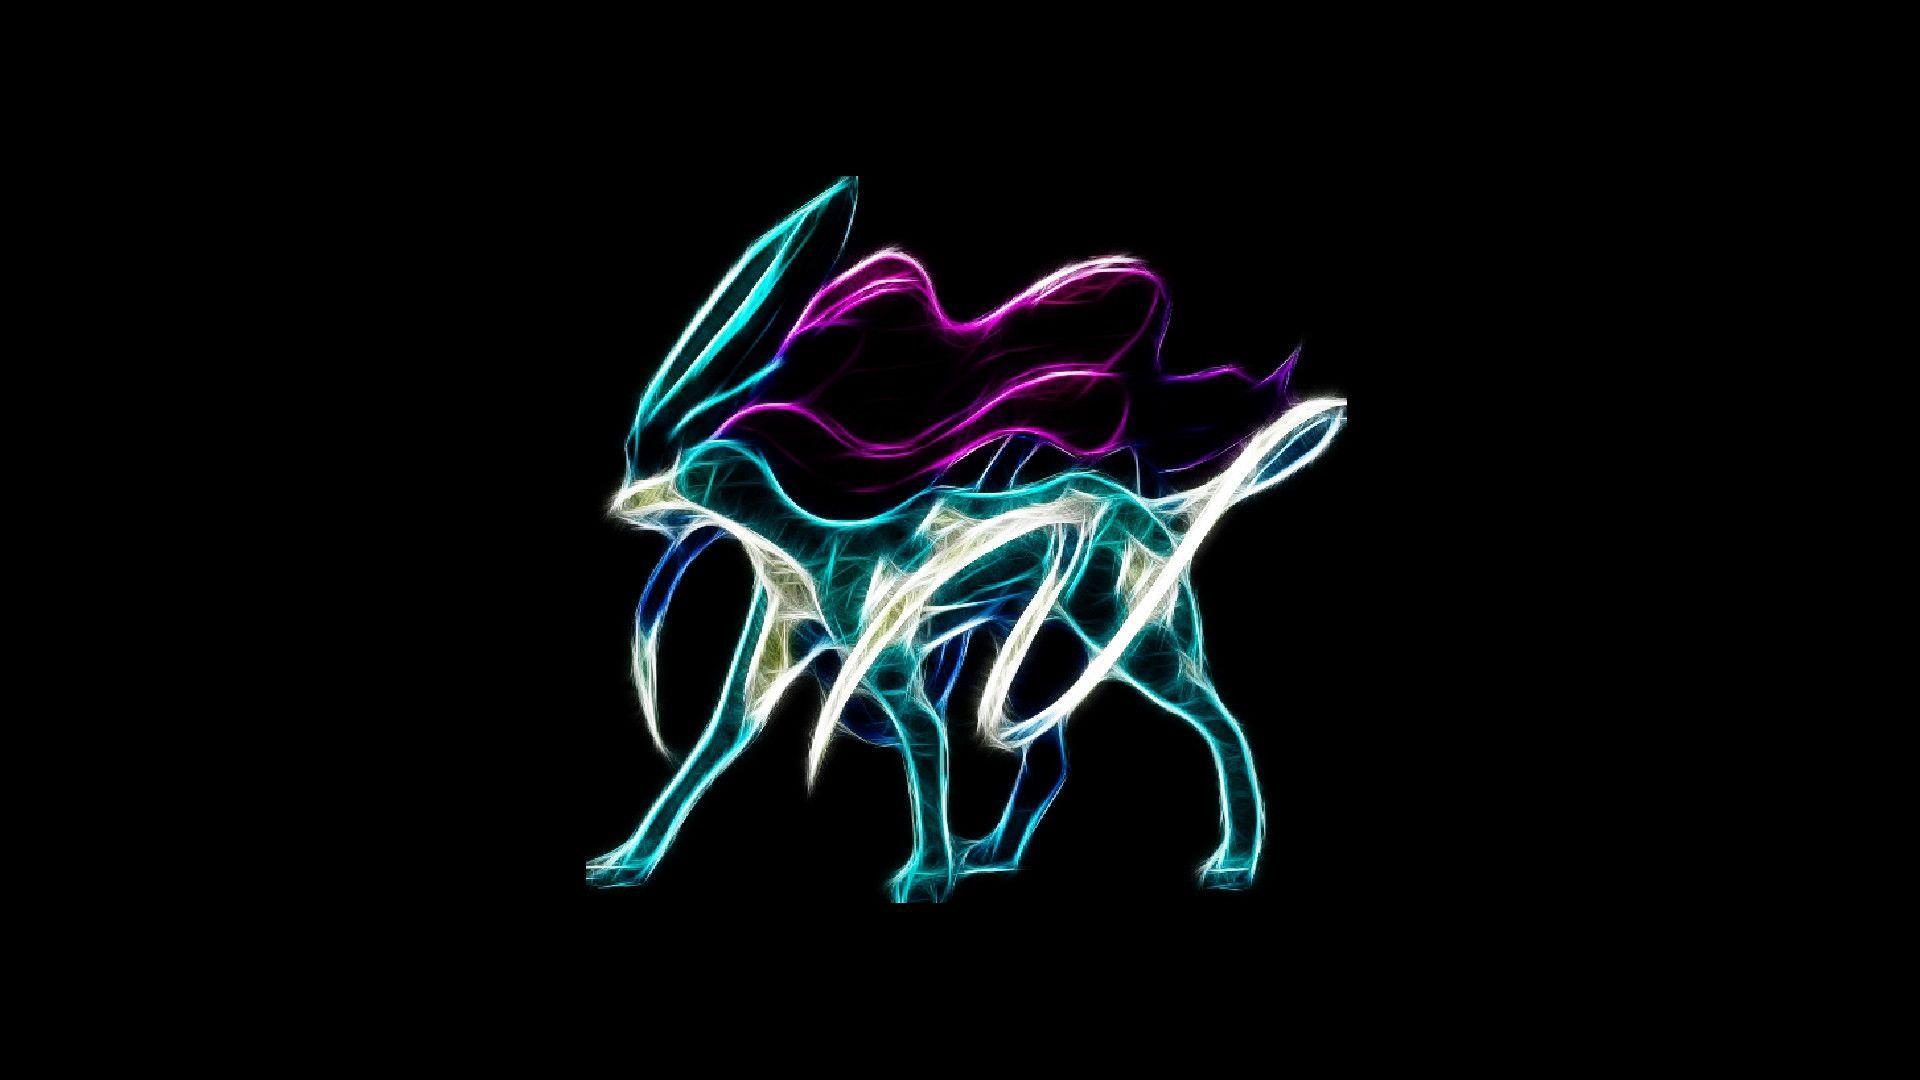 Suicune Wallpapers, Suicune Wallpapers Pack V.84LKZ, Top4Themes Graphics.